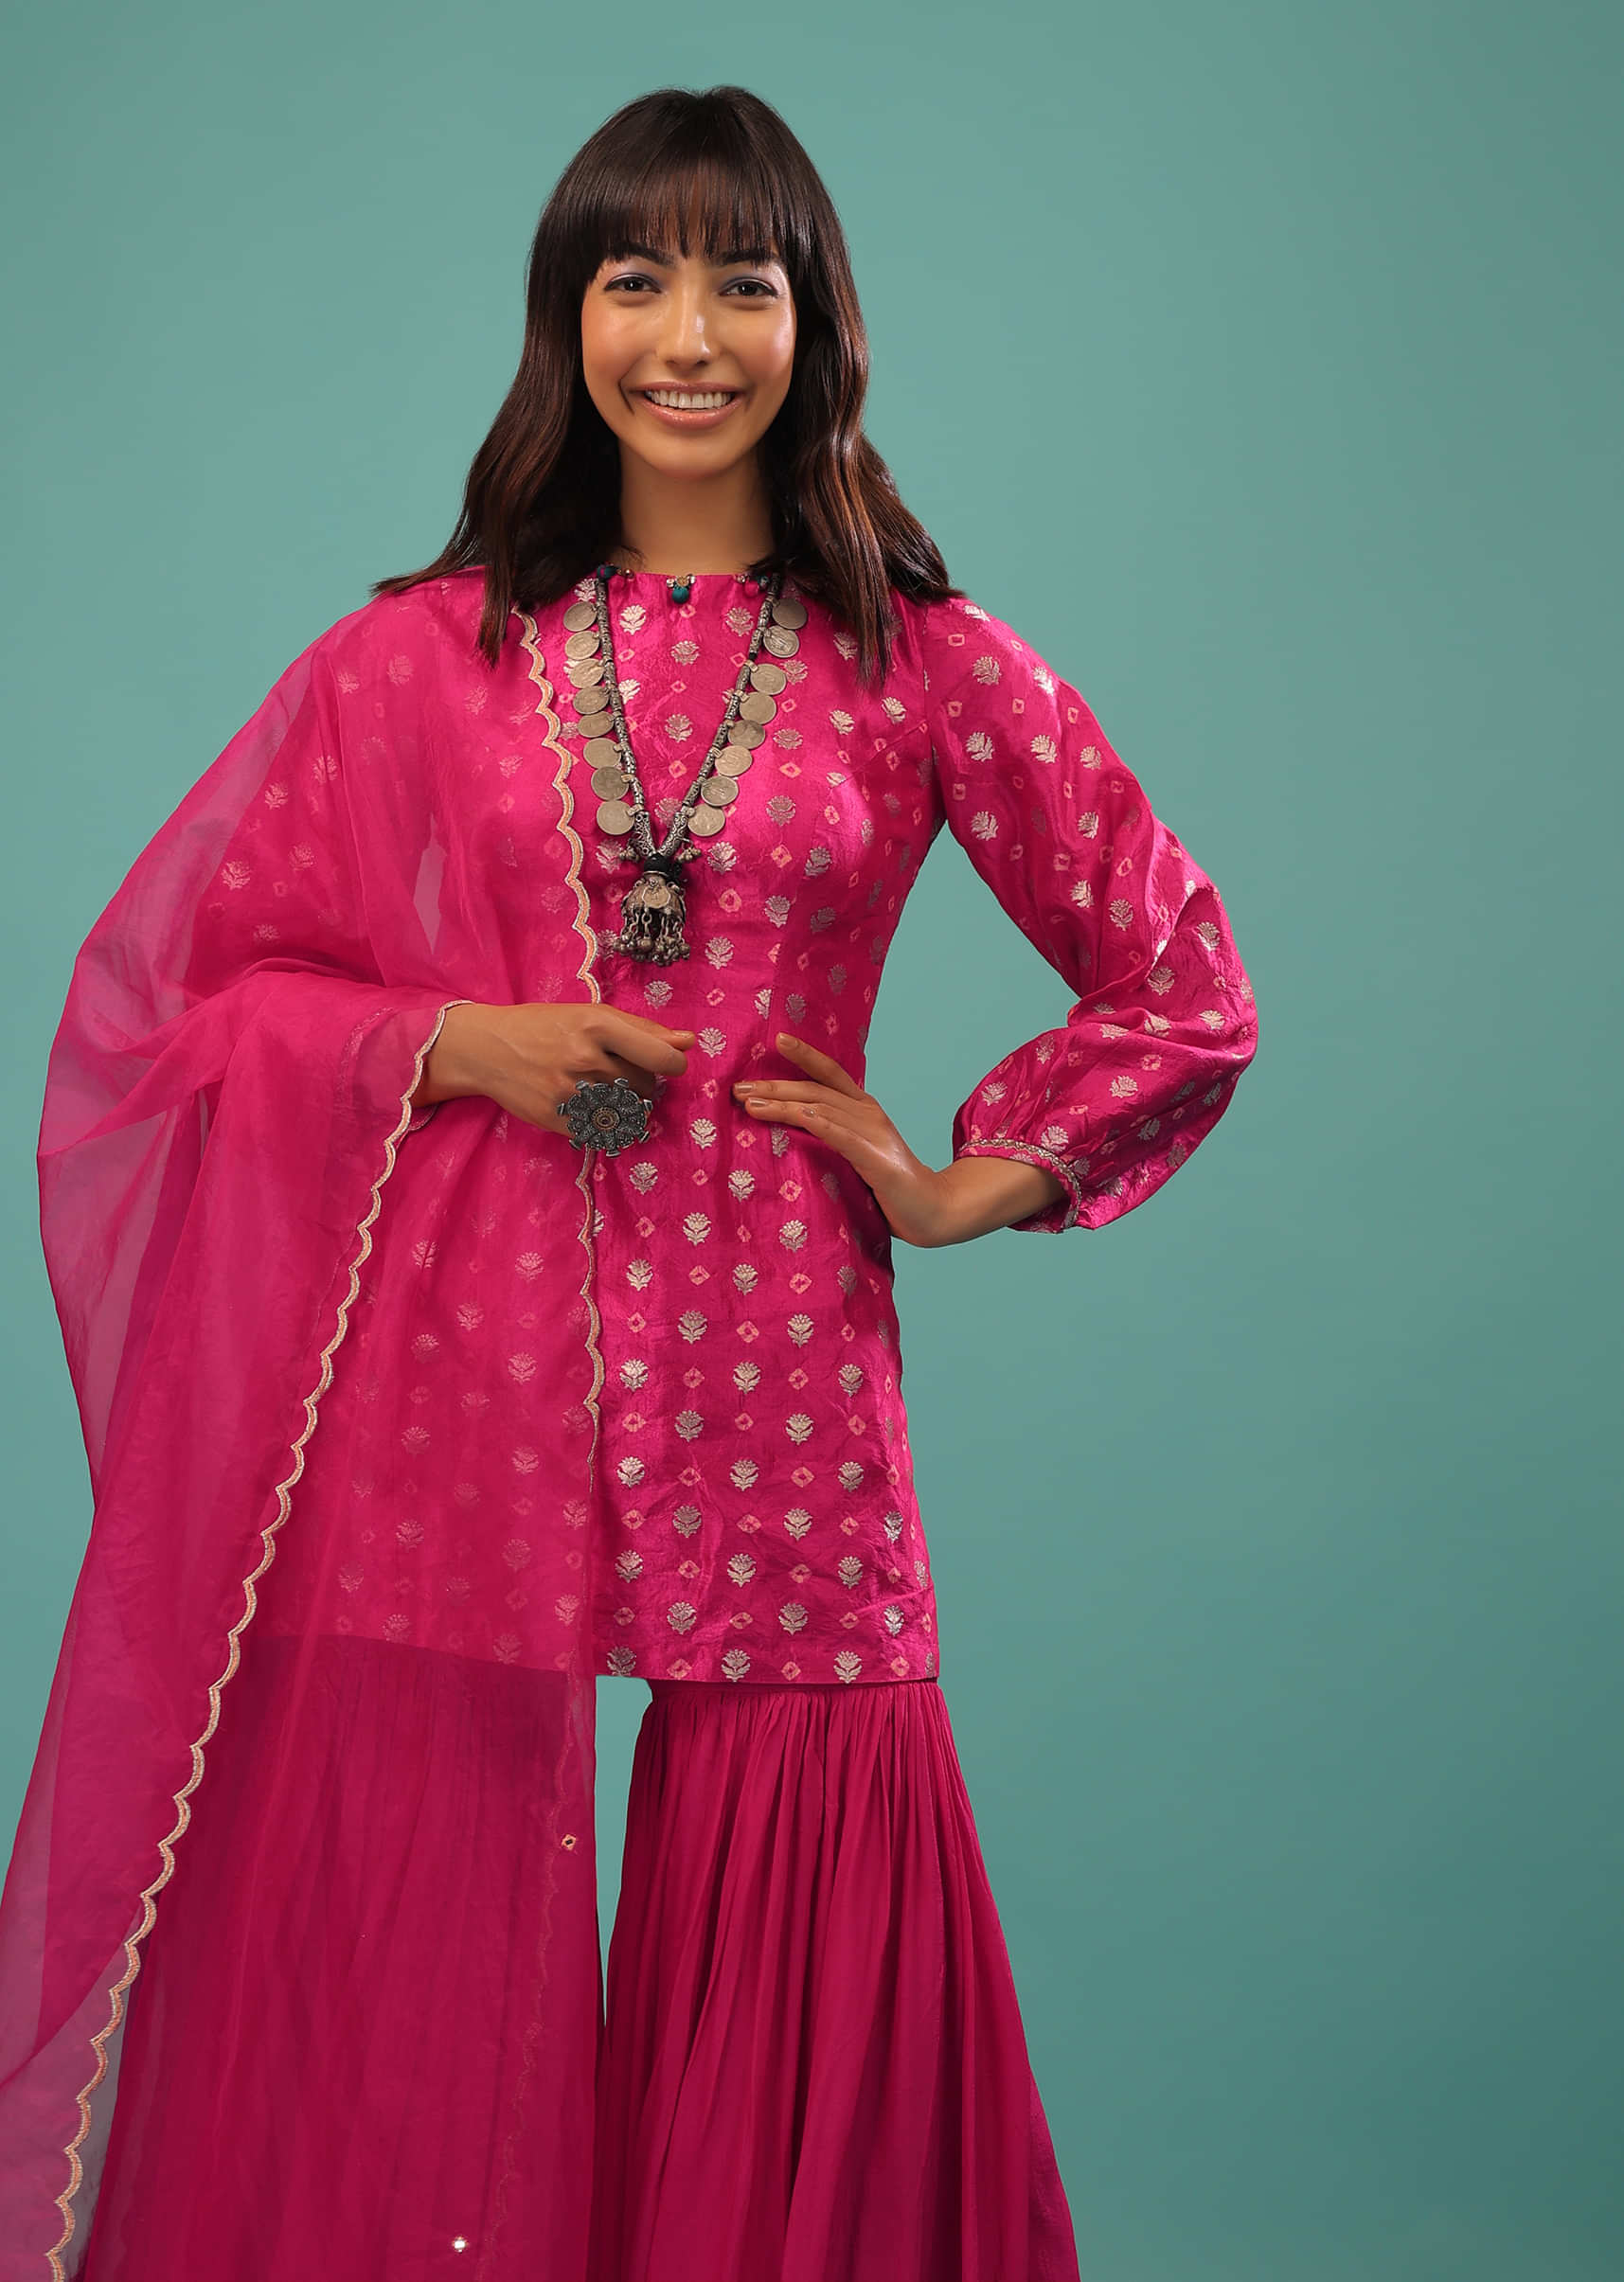 Hot Pink Sharara Suit In With Brocade Buttis And Bandhani Print